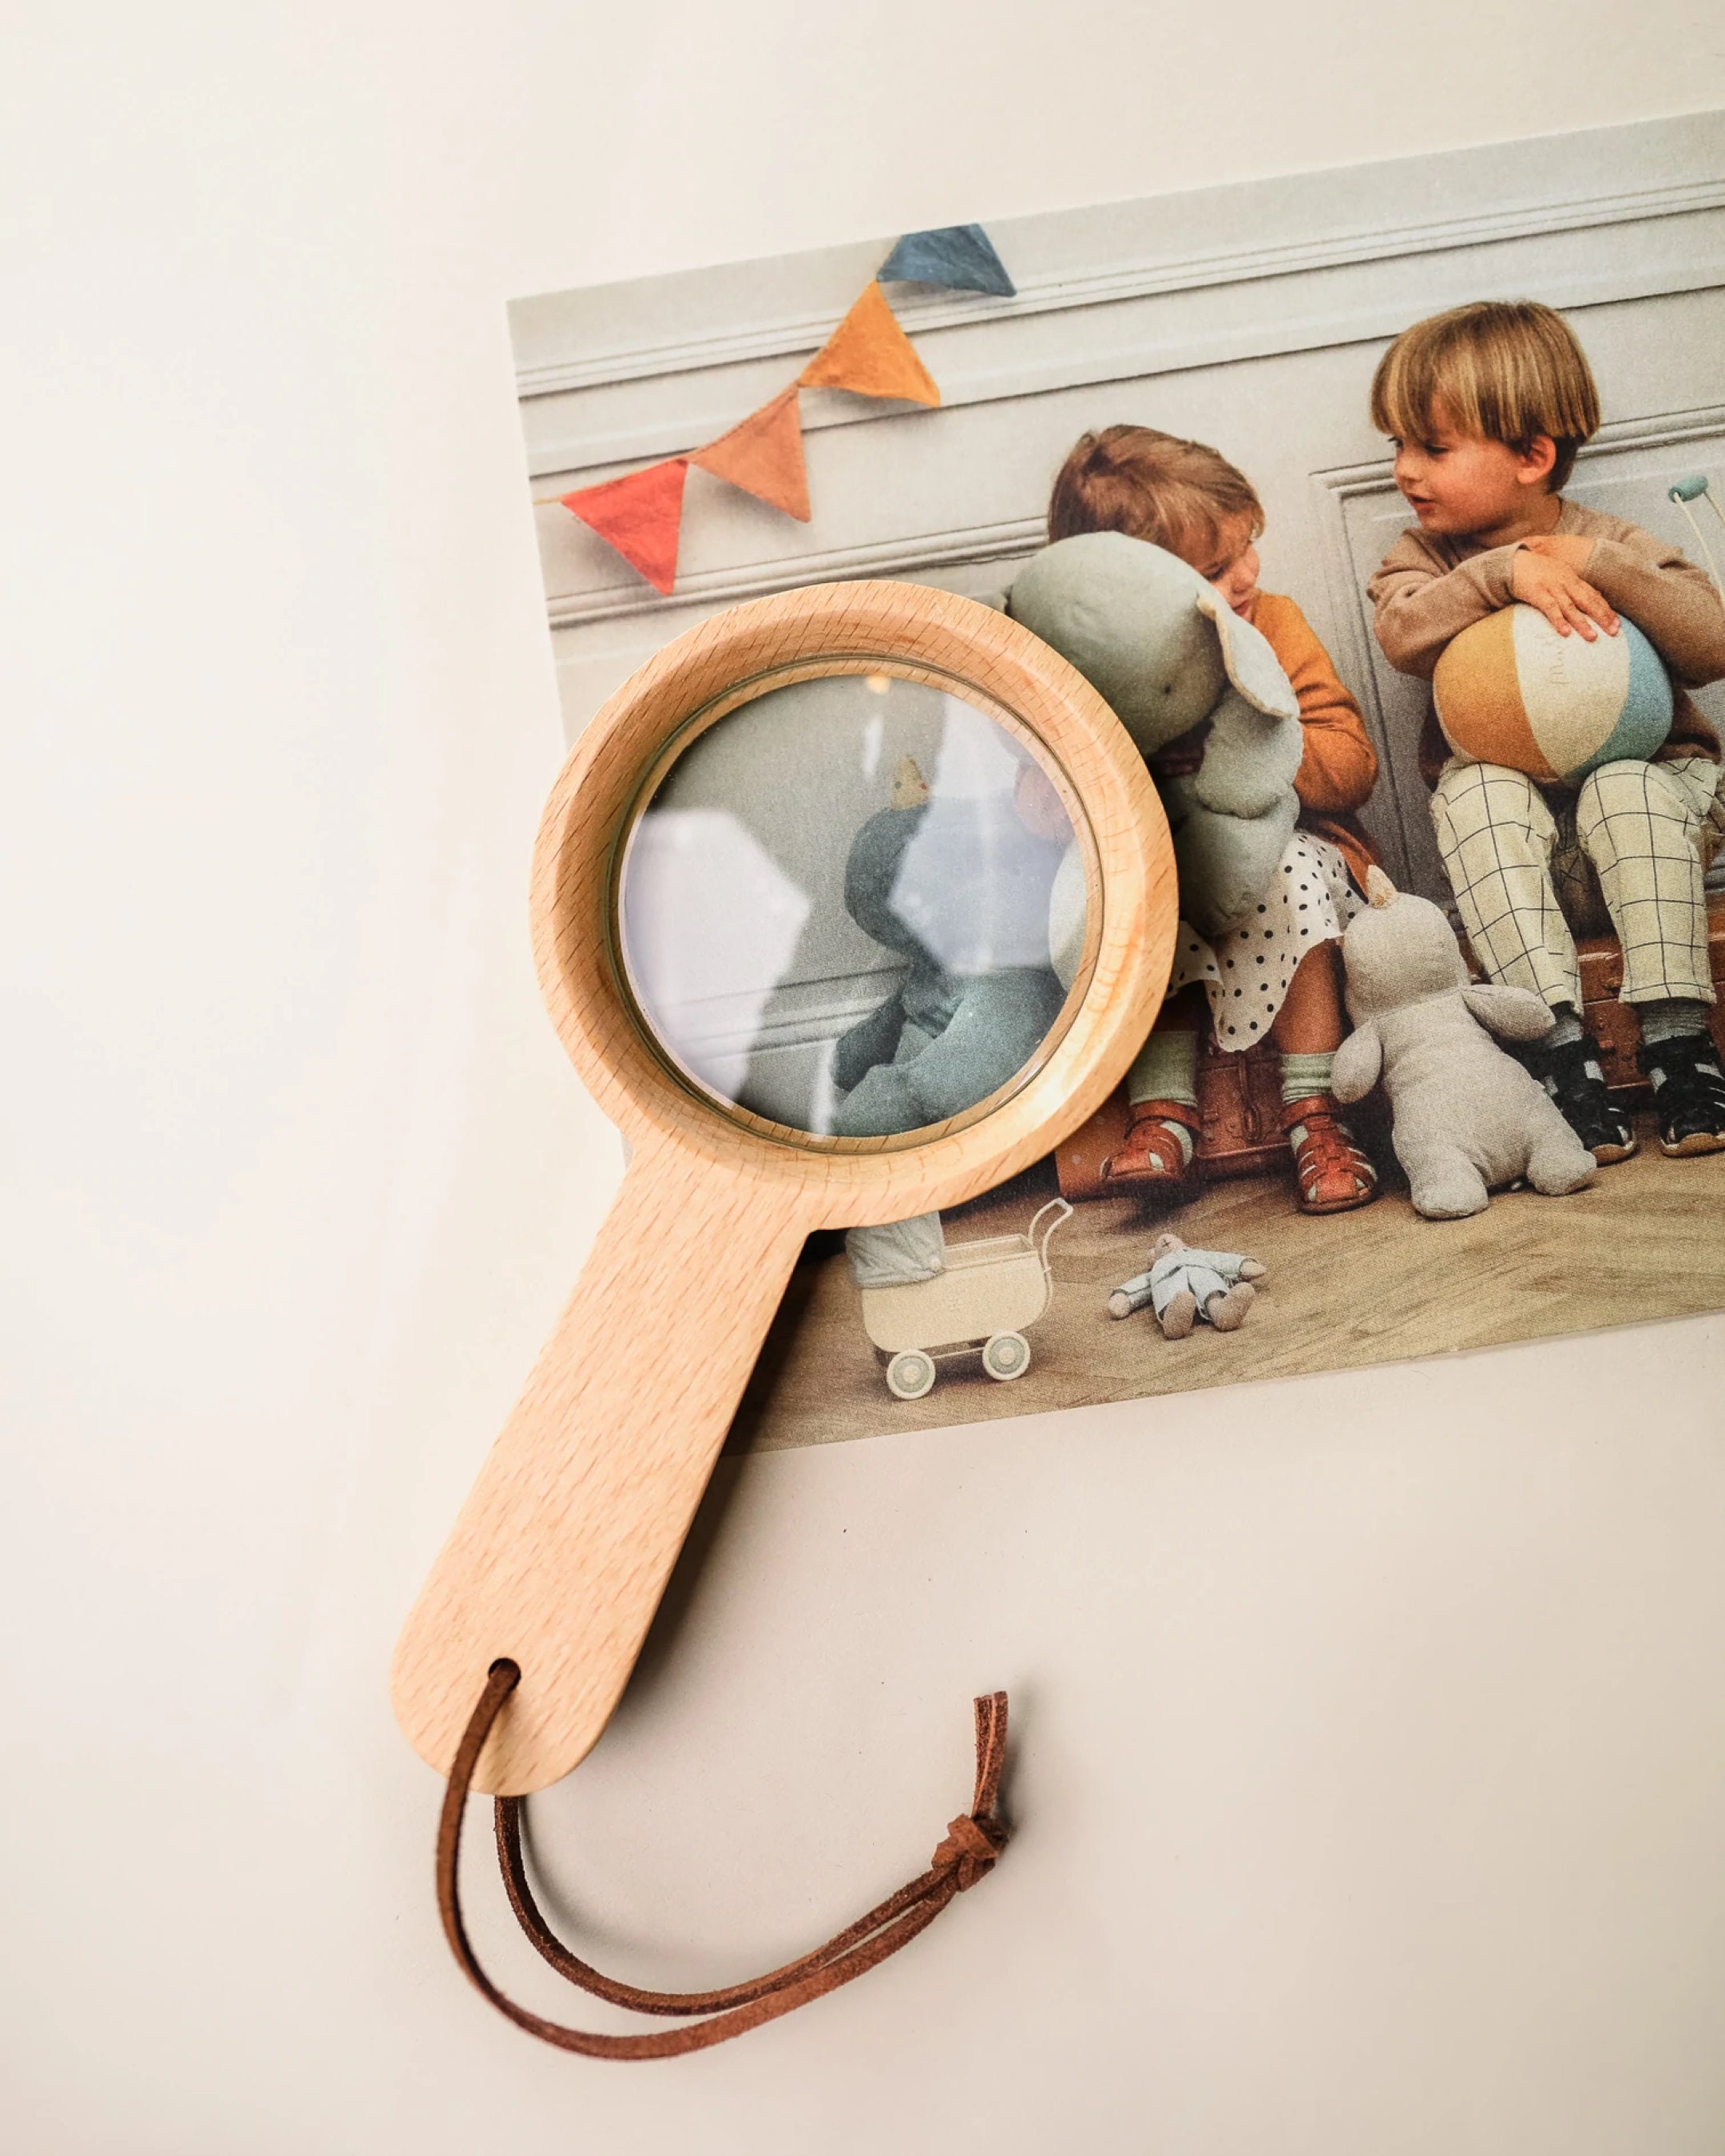 ADVENTURERS MAGNIFYING GLASS - THE TOY STORE